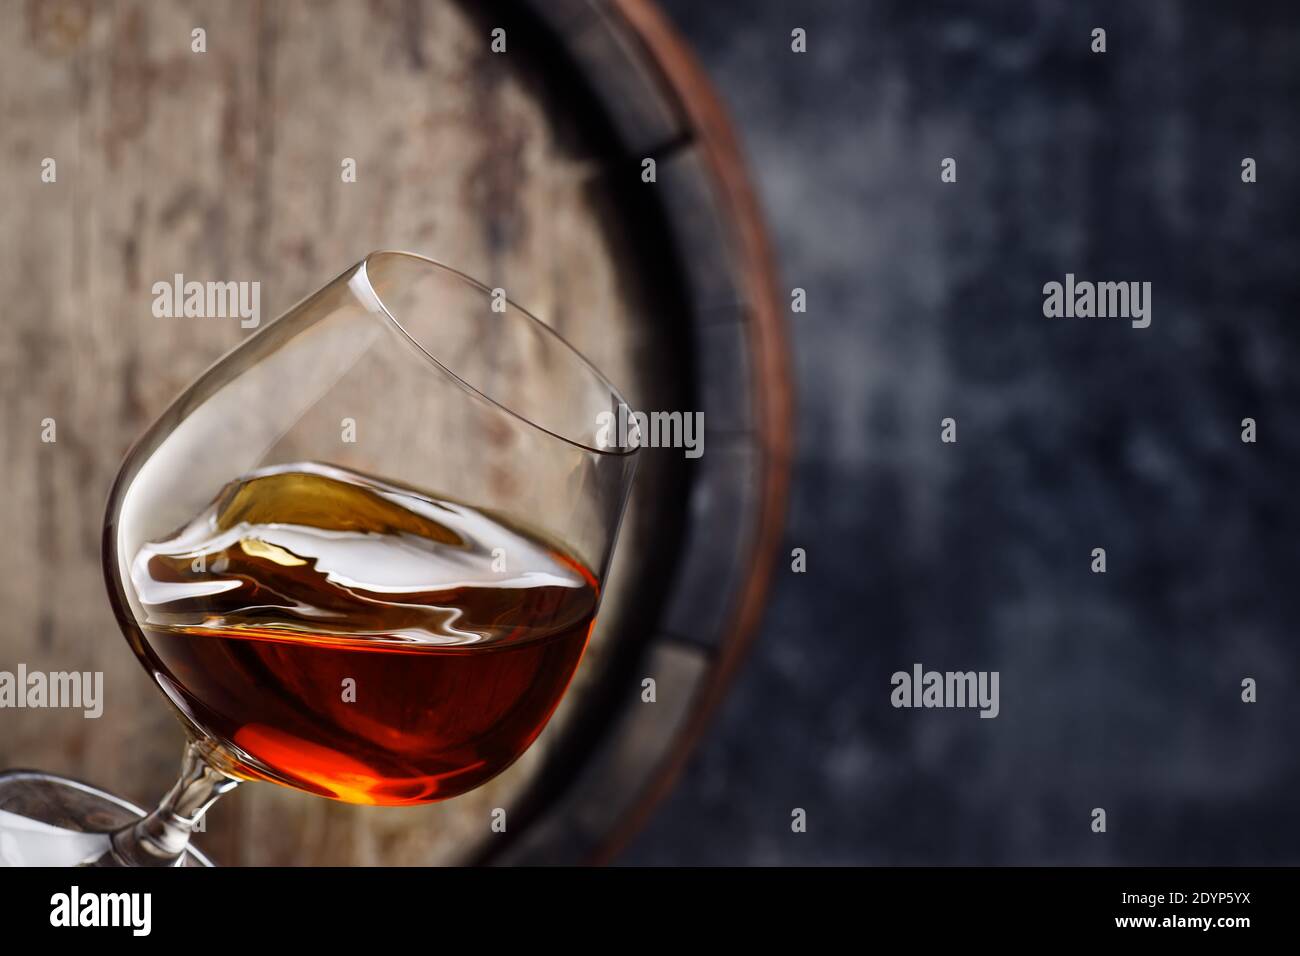 brandy in snifter glass Stock Photo